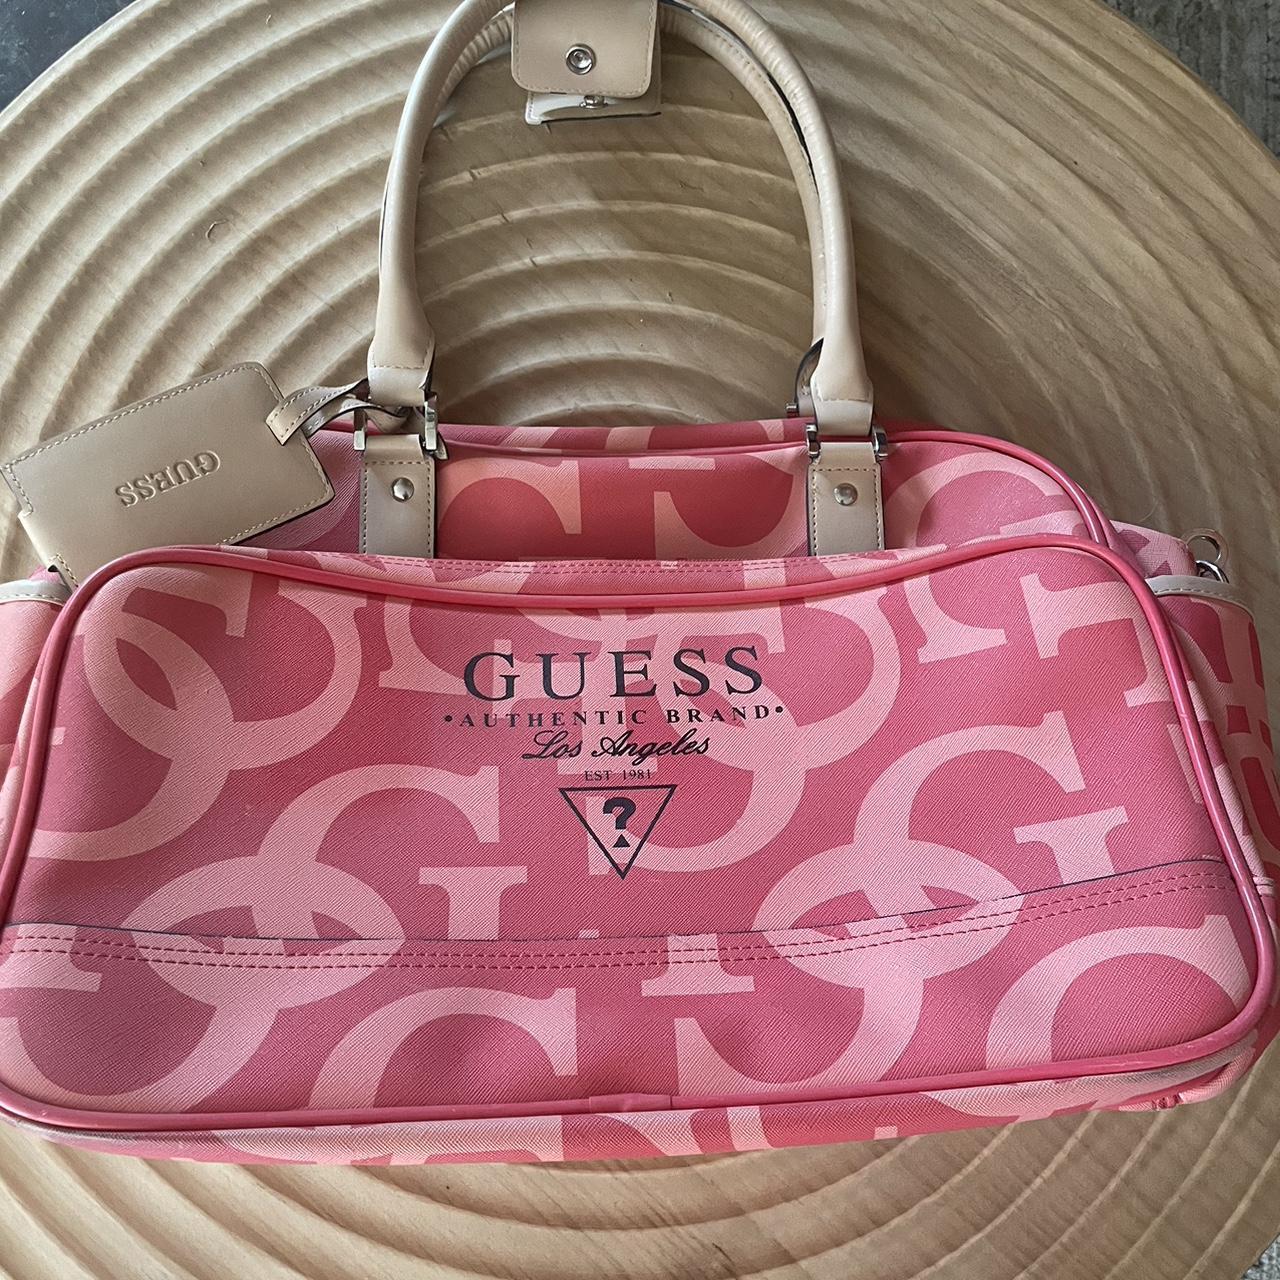 Guess Purse Top 10: Shocking Celebrity Choices Revealed!